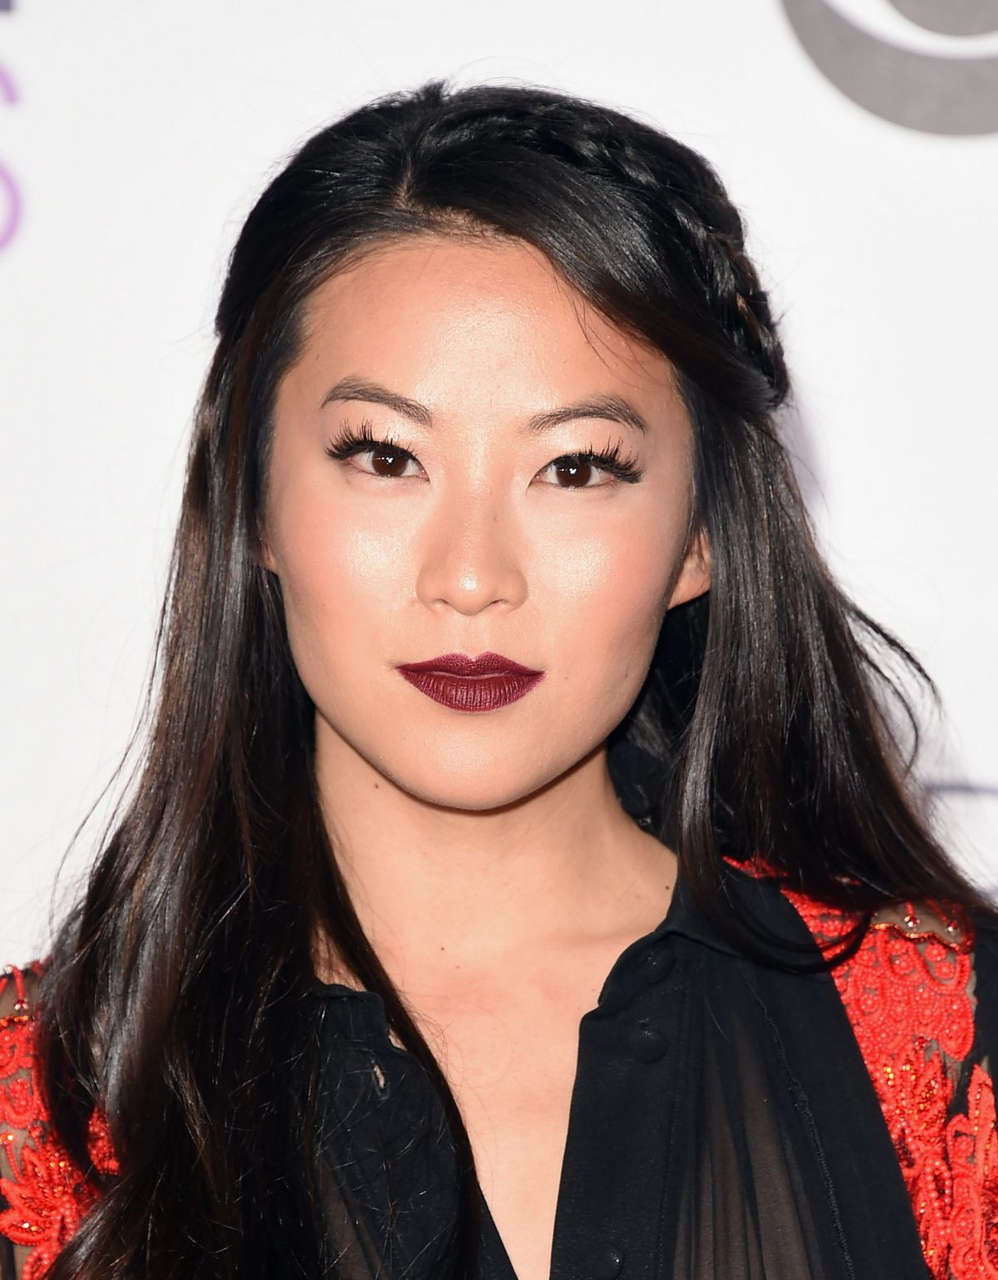 Arden Cho 2016 Peoples Choice Awards Los Angeles